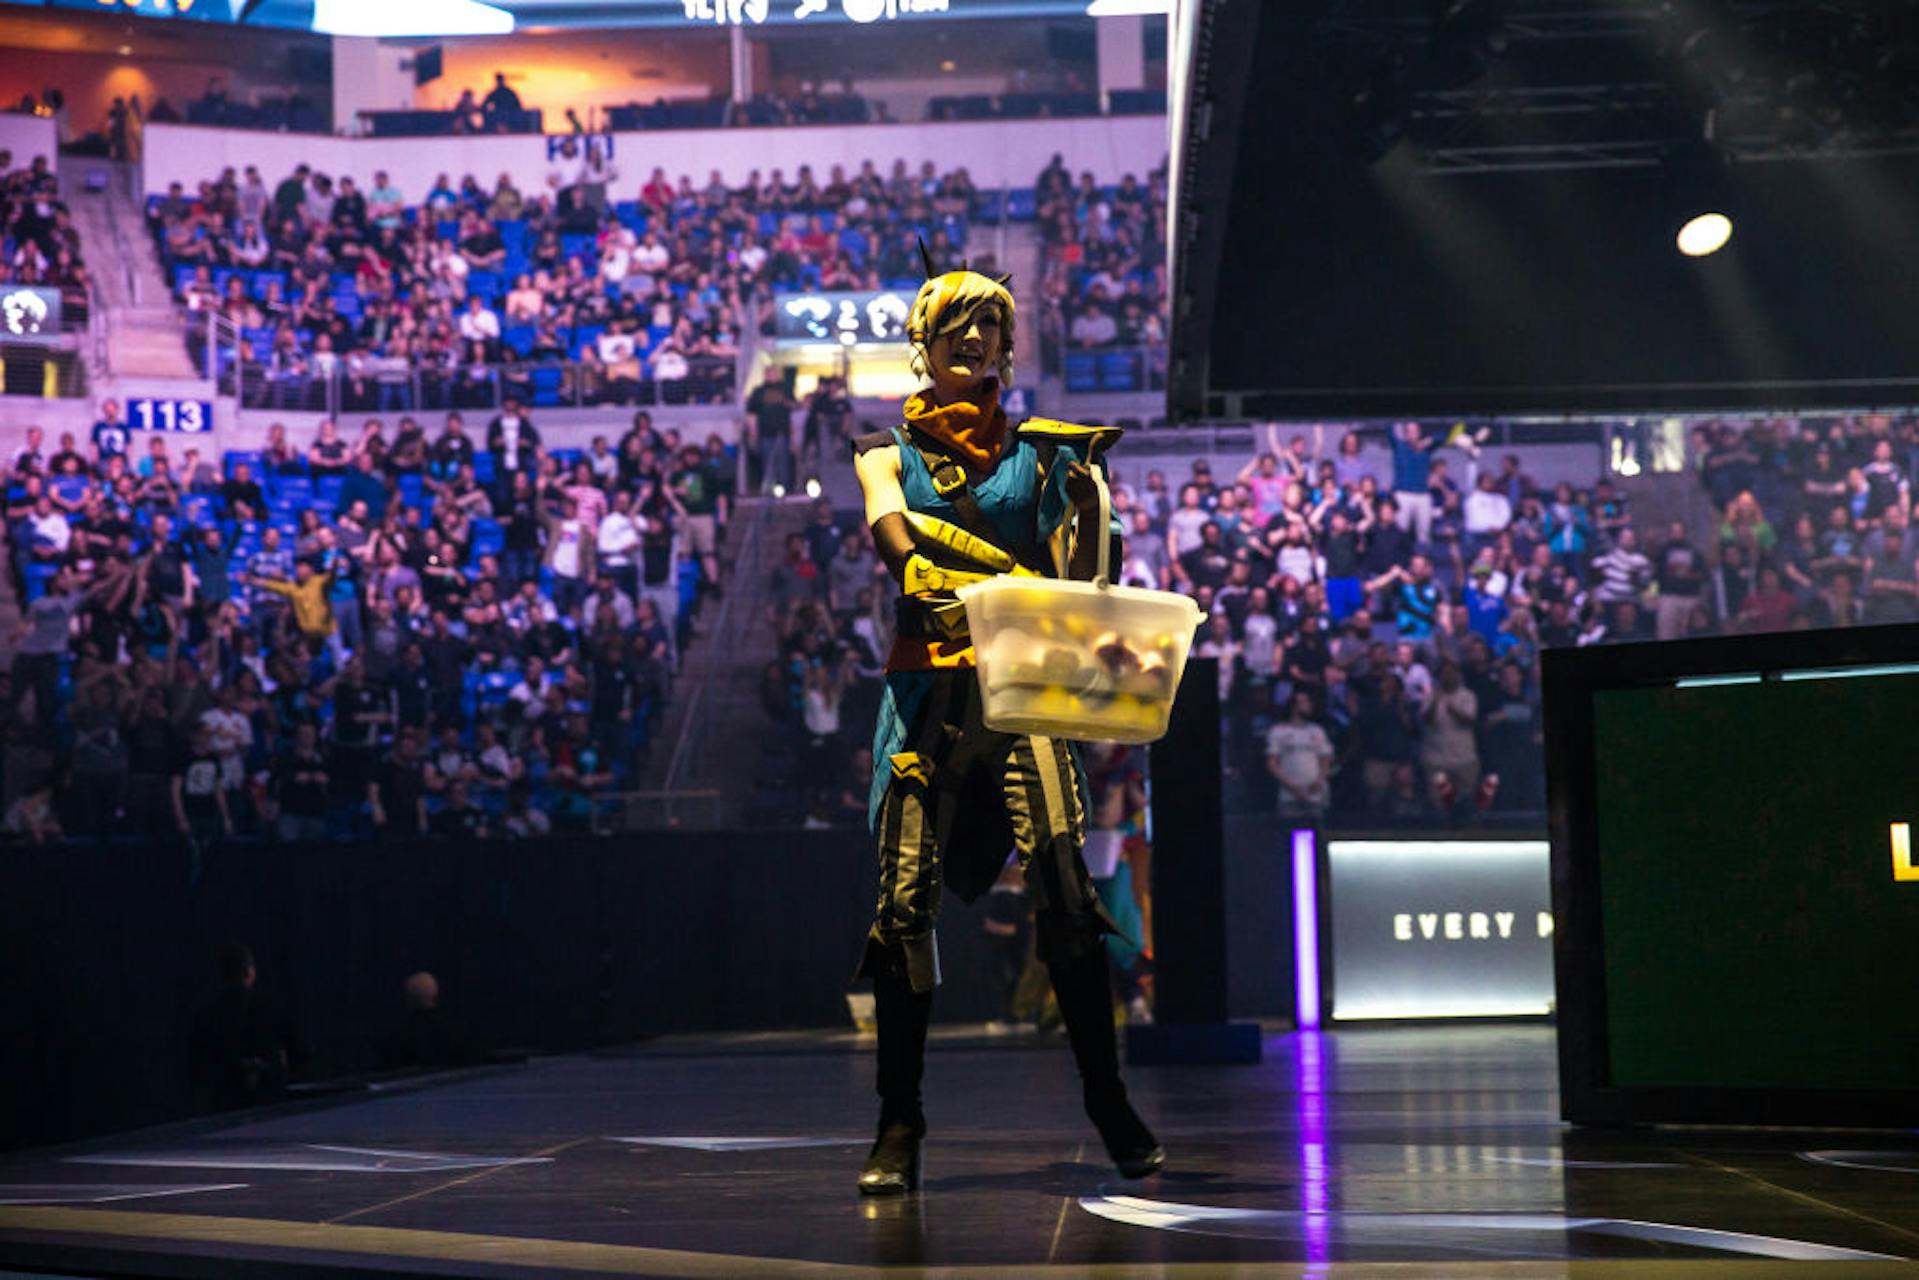 esports: Louis Vuitton and Riot Games pioneer a first-of-its-kind